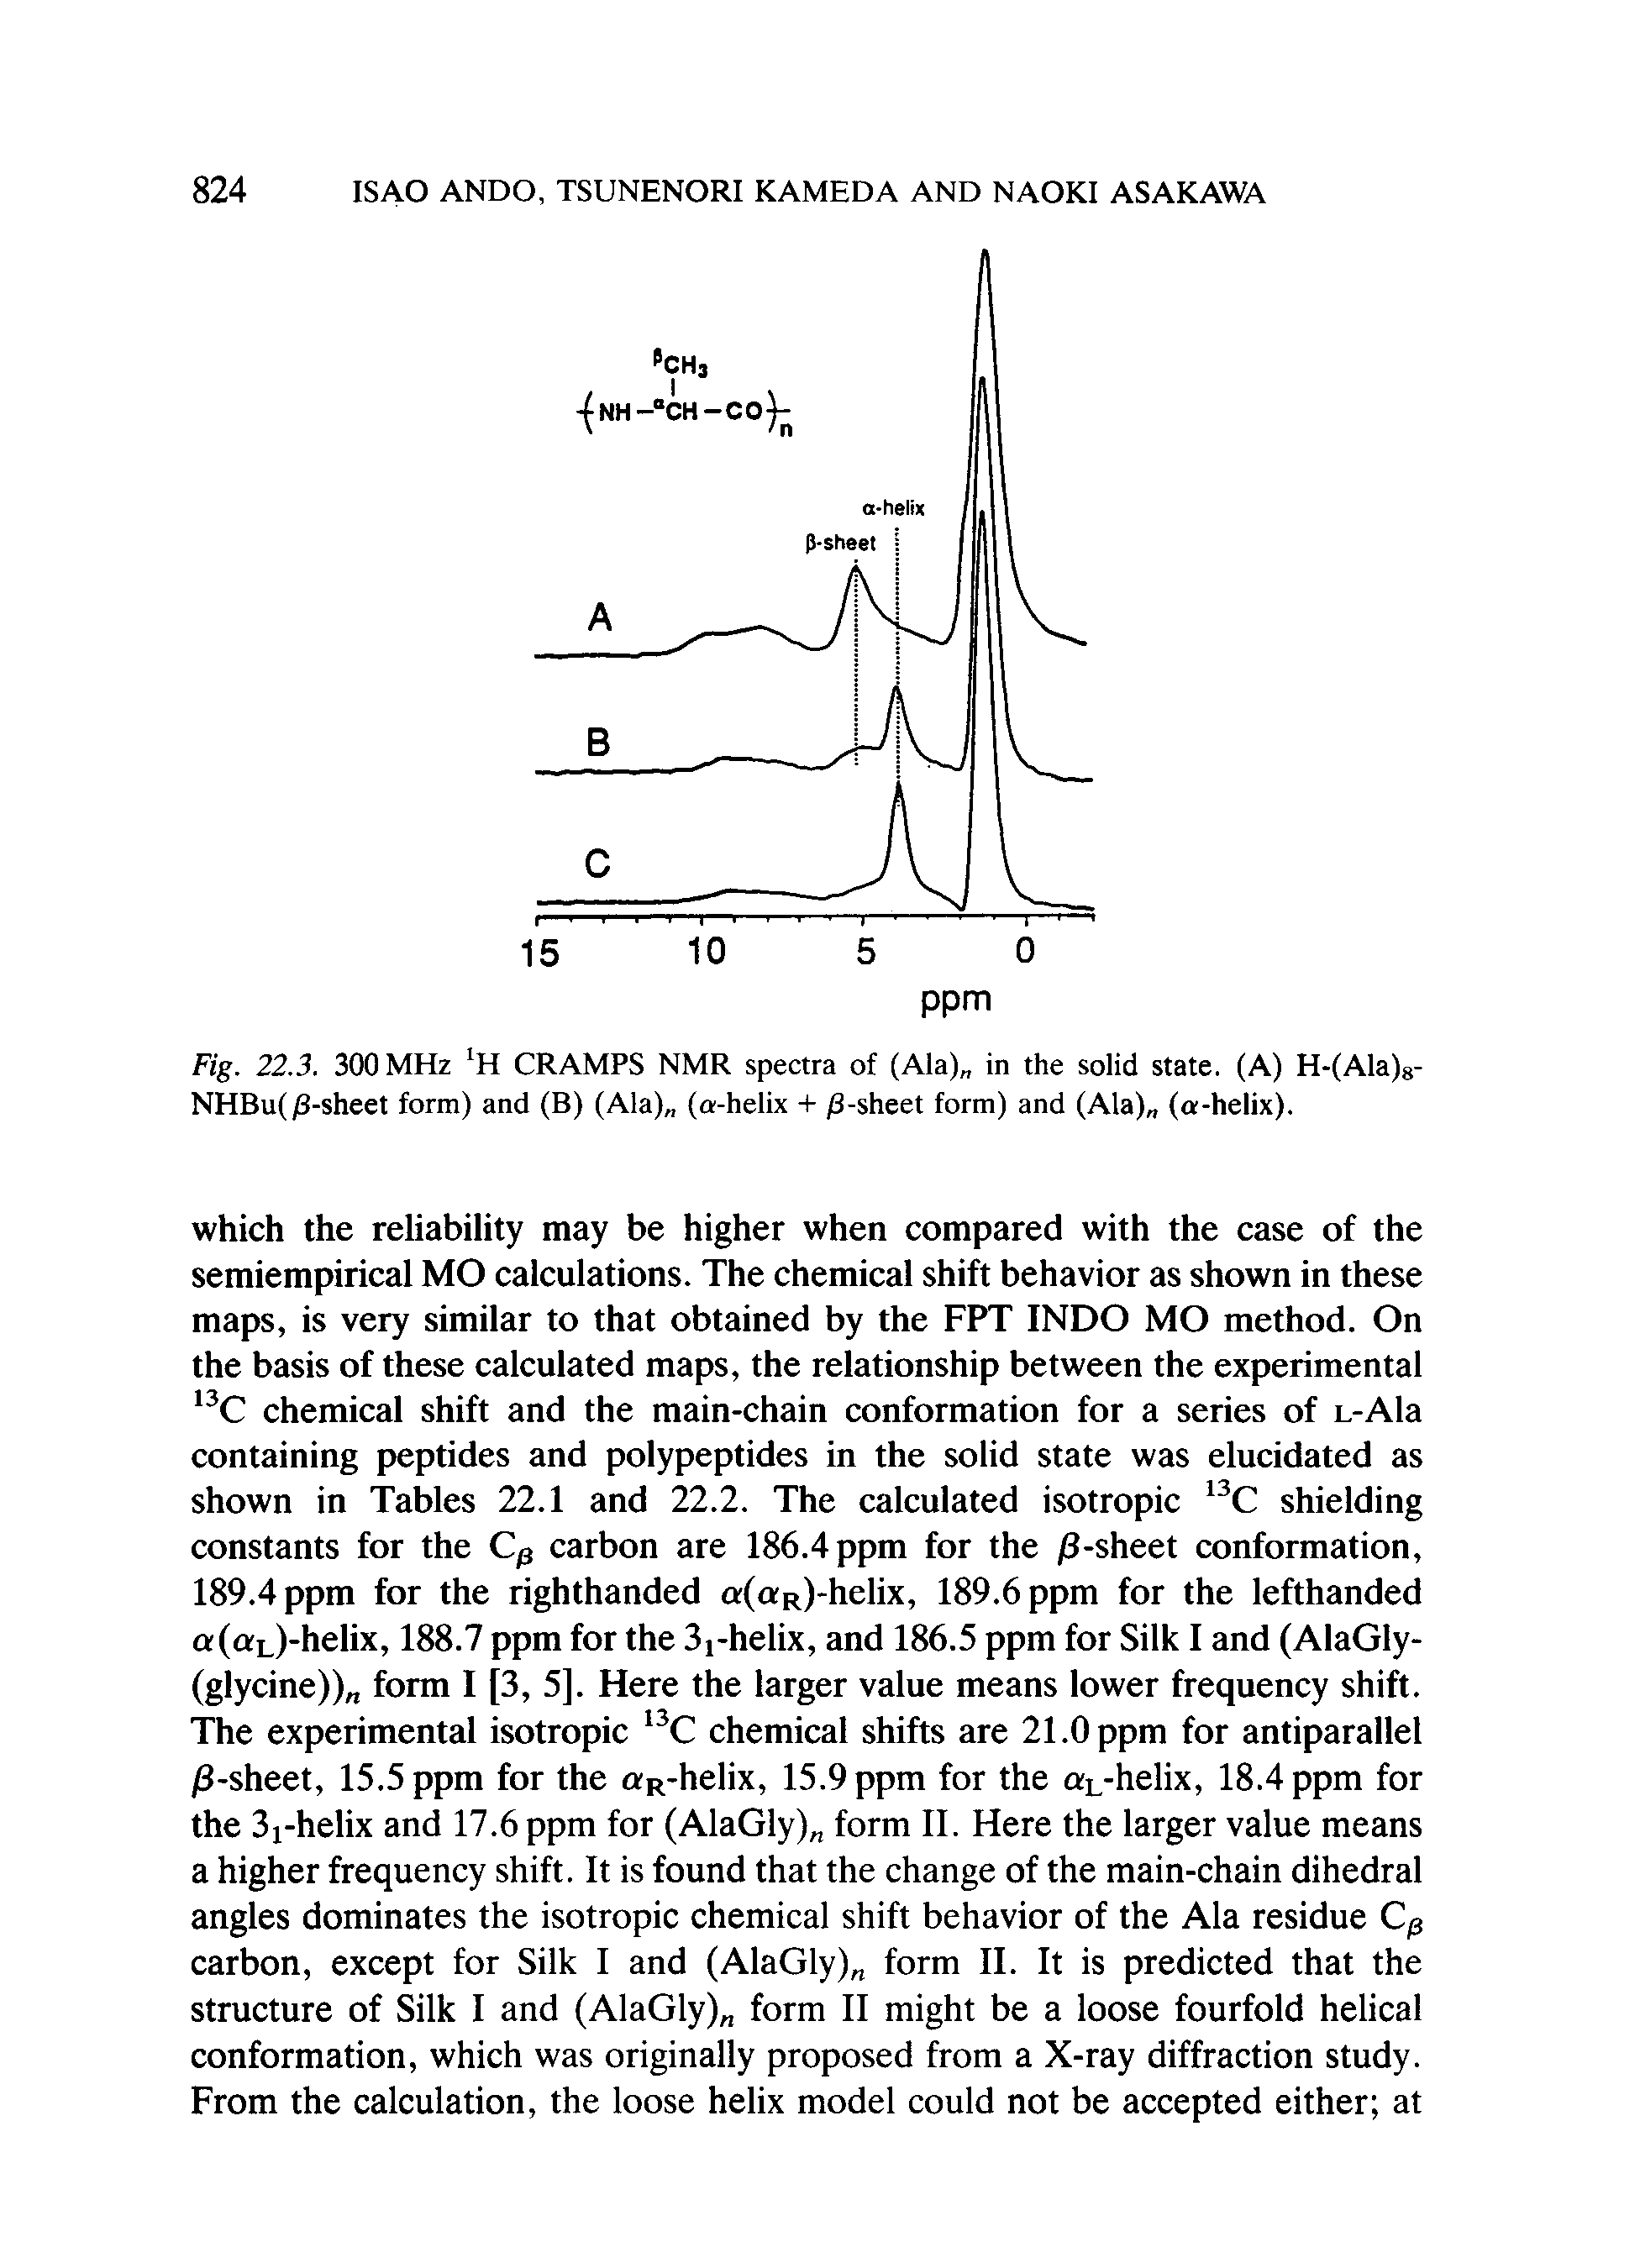 Fig. 22.3. 300 MHz H CRAMPS NMR spectra of (Ala) in the solid state. (A) H-(Ala)8-NHBu(j8-sheet form) and (B) (Ala) (a-helix + /3-sheet form) and (Ala) (a-helix).